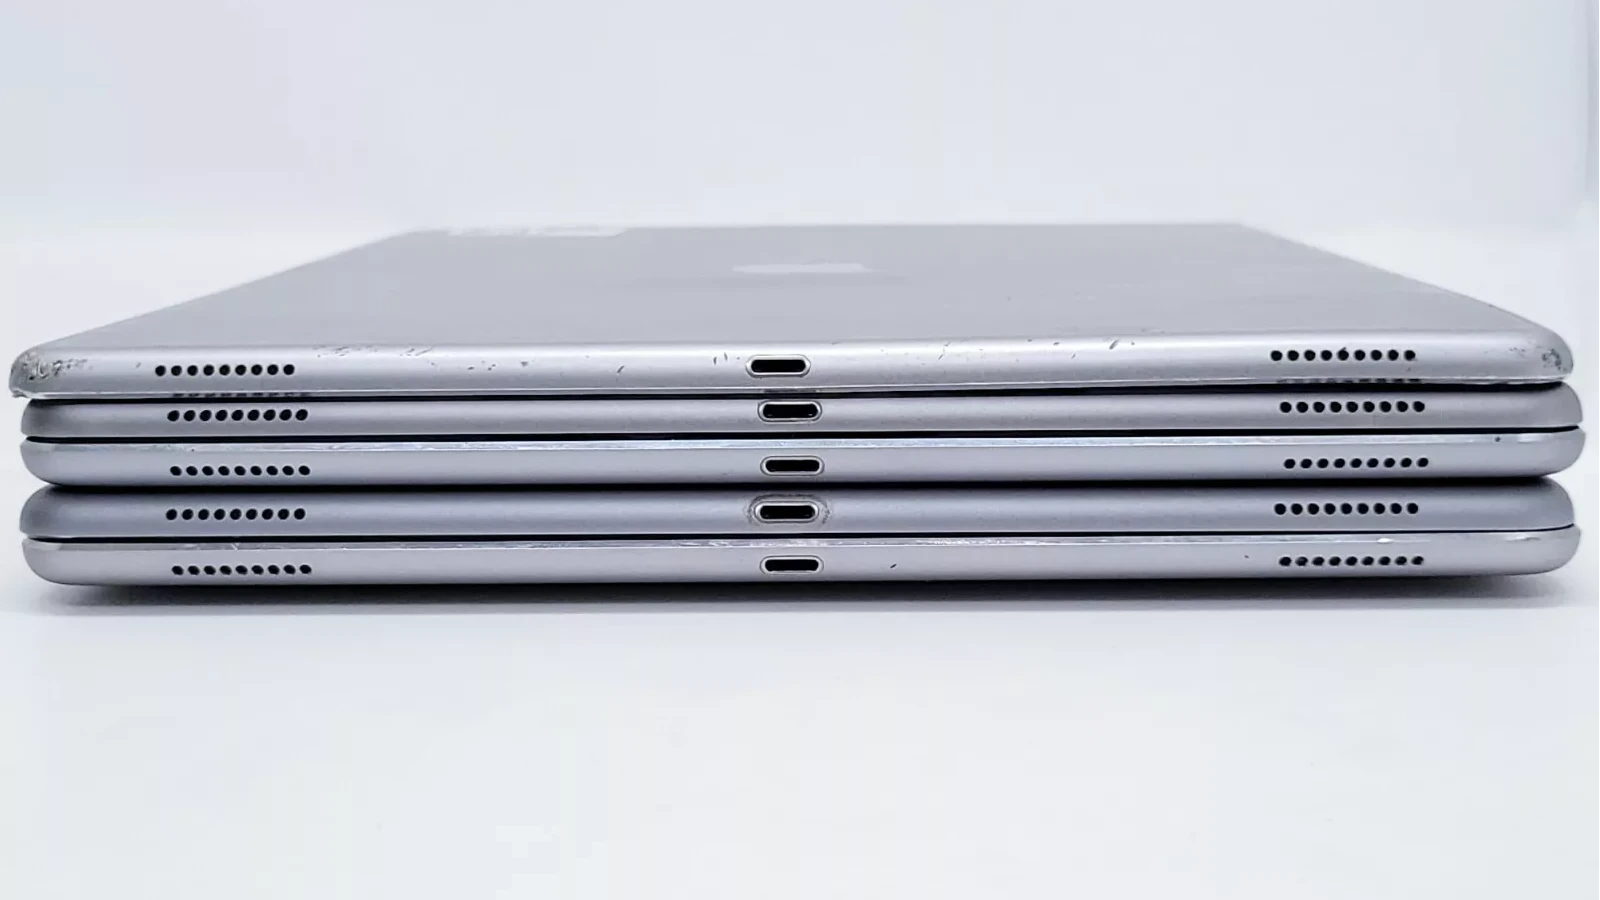 Stack of iPads With Bad Charging Ports